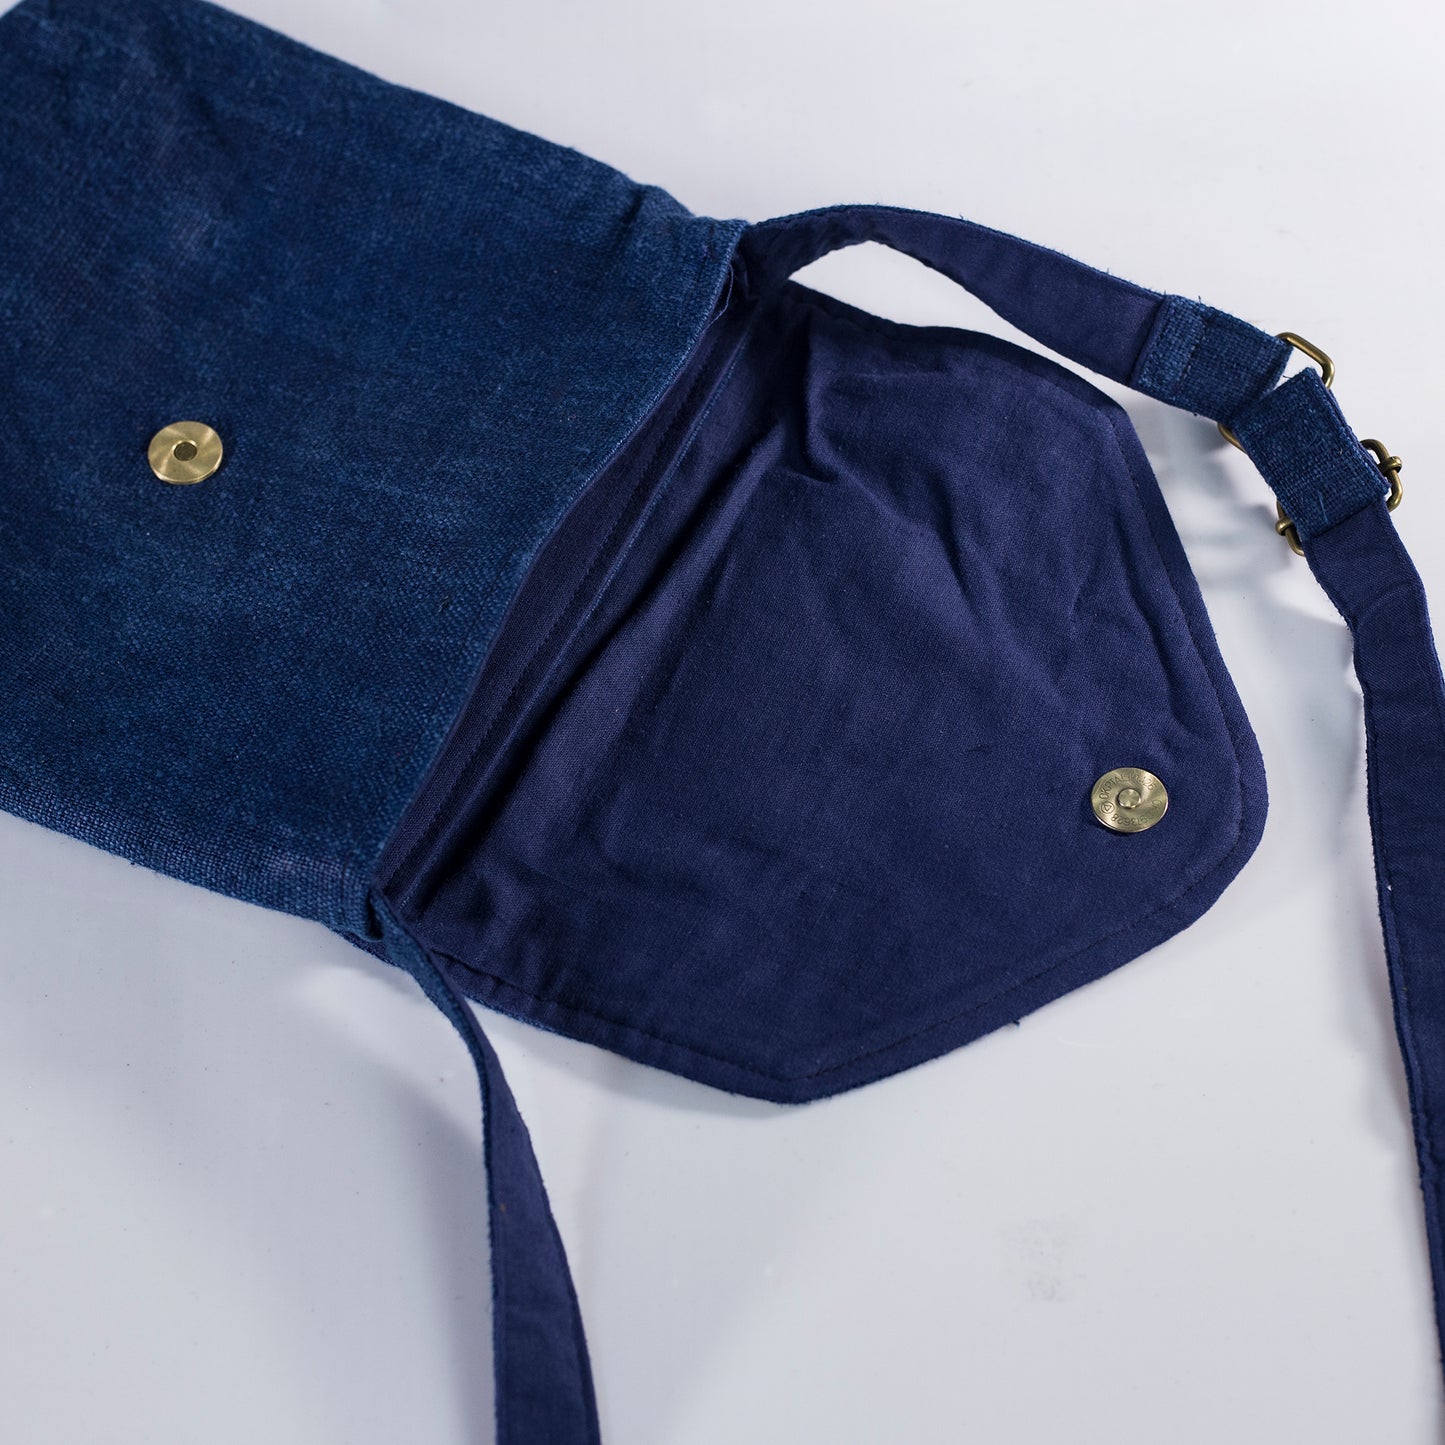 Purity Collection: Cross-body bag, natural hemp in BLUE, vintage patch